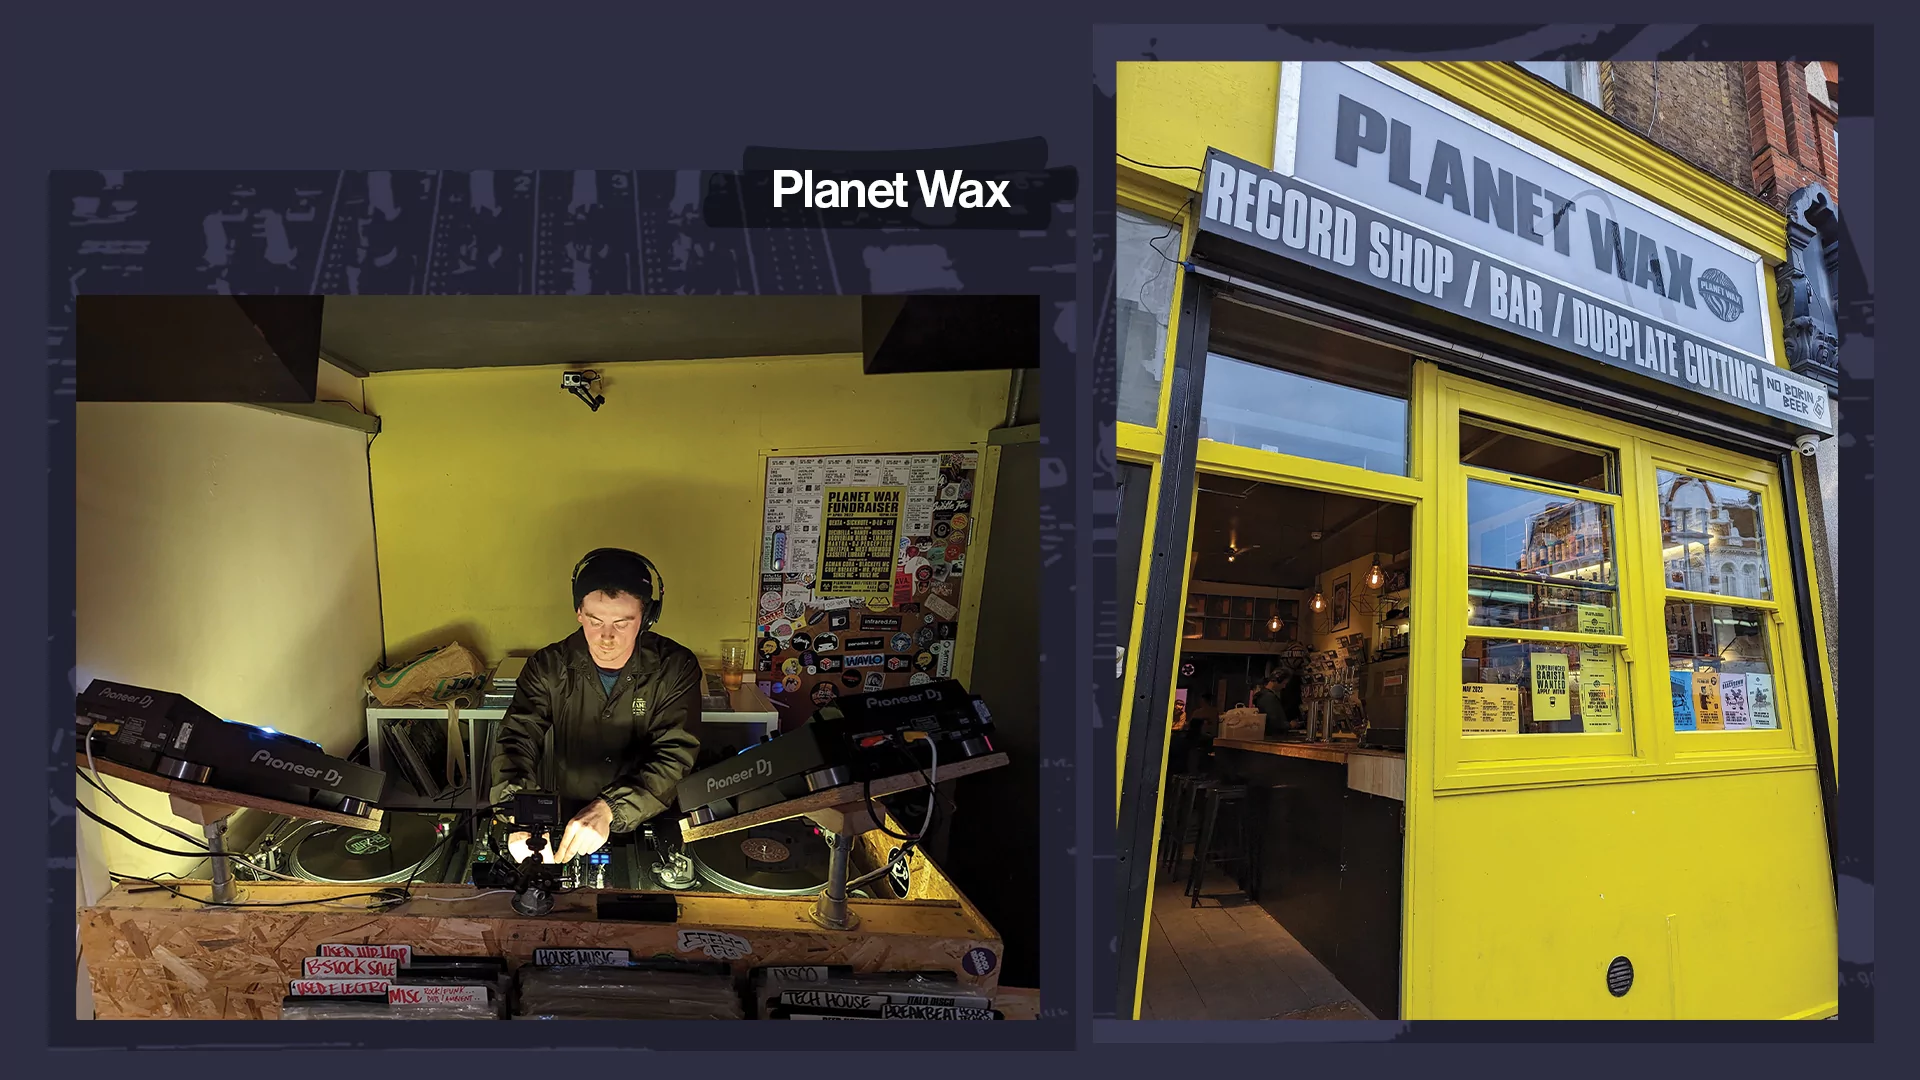 Collage of photos taken at Planet Wax DJ events on a blue background